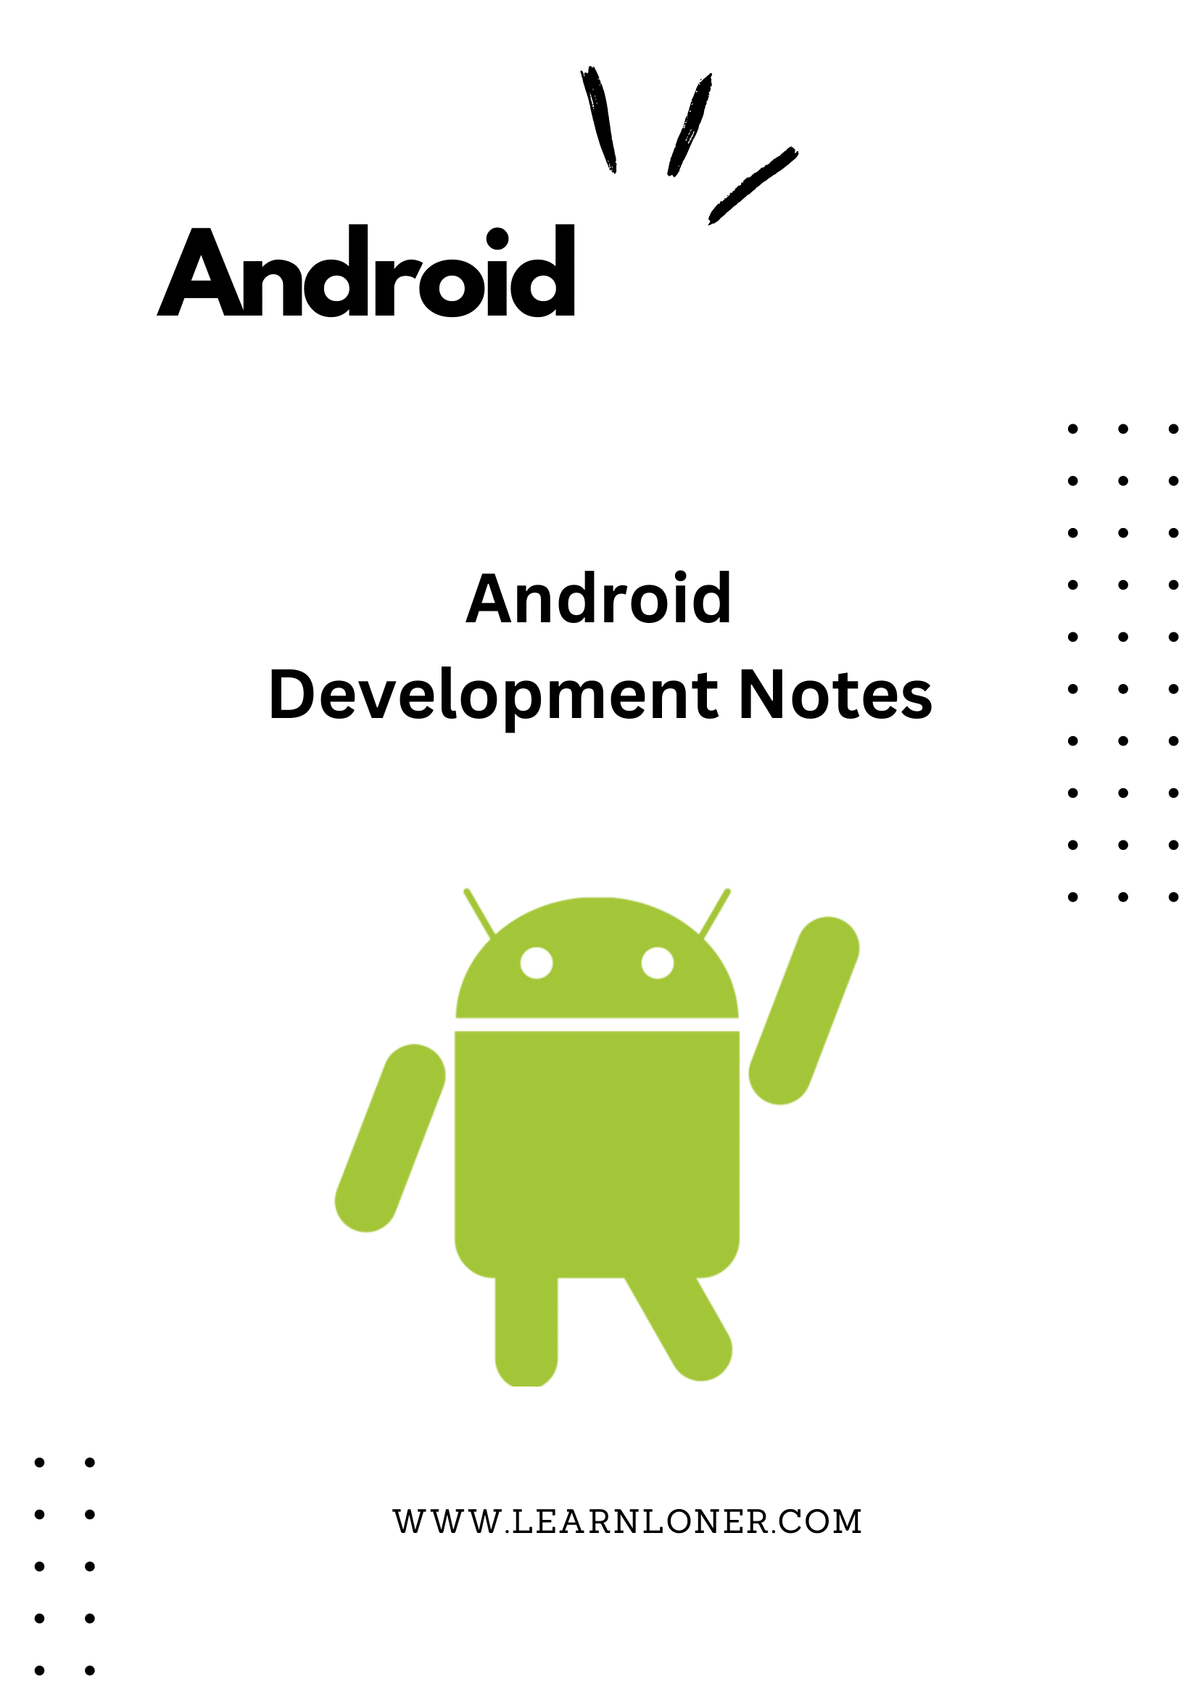 Android Development Notes PDF